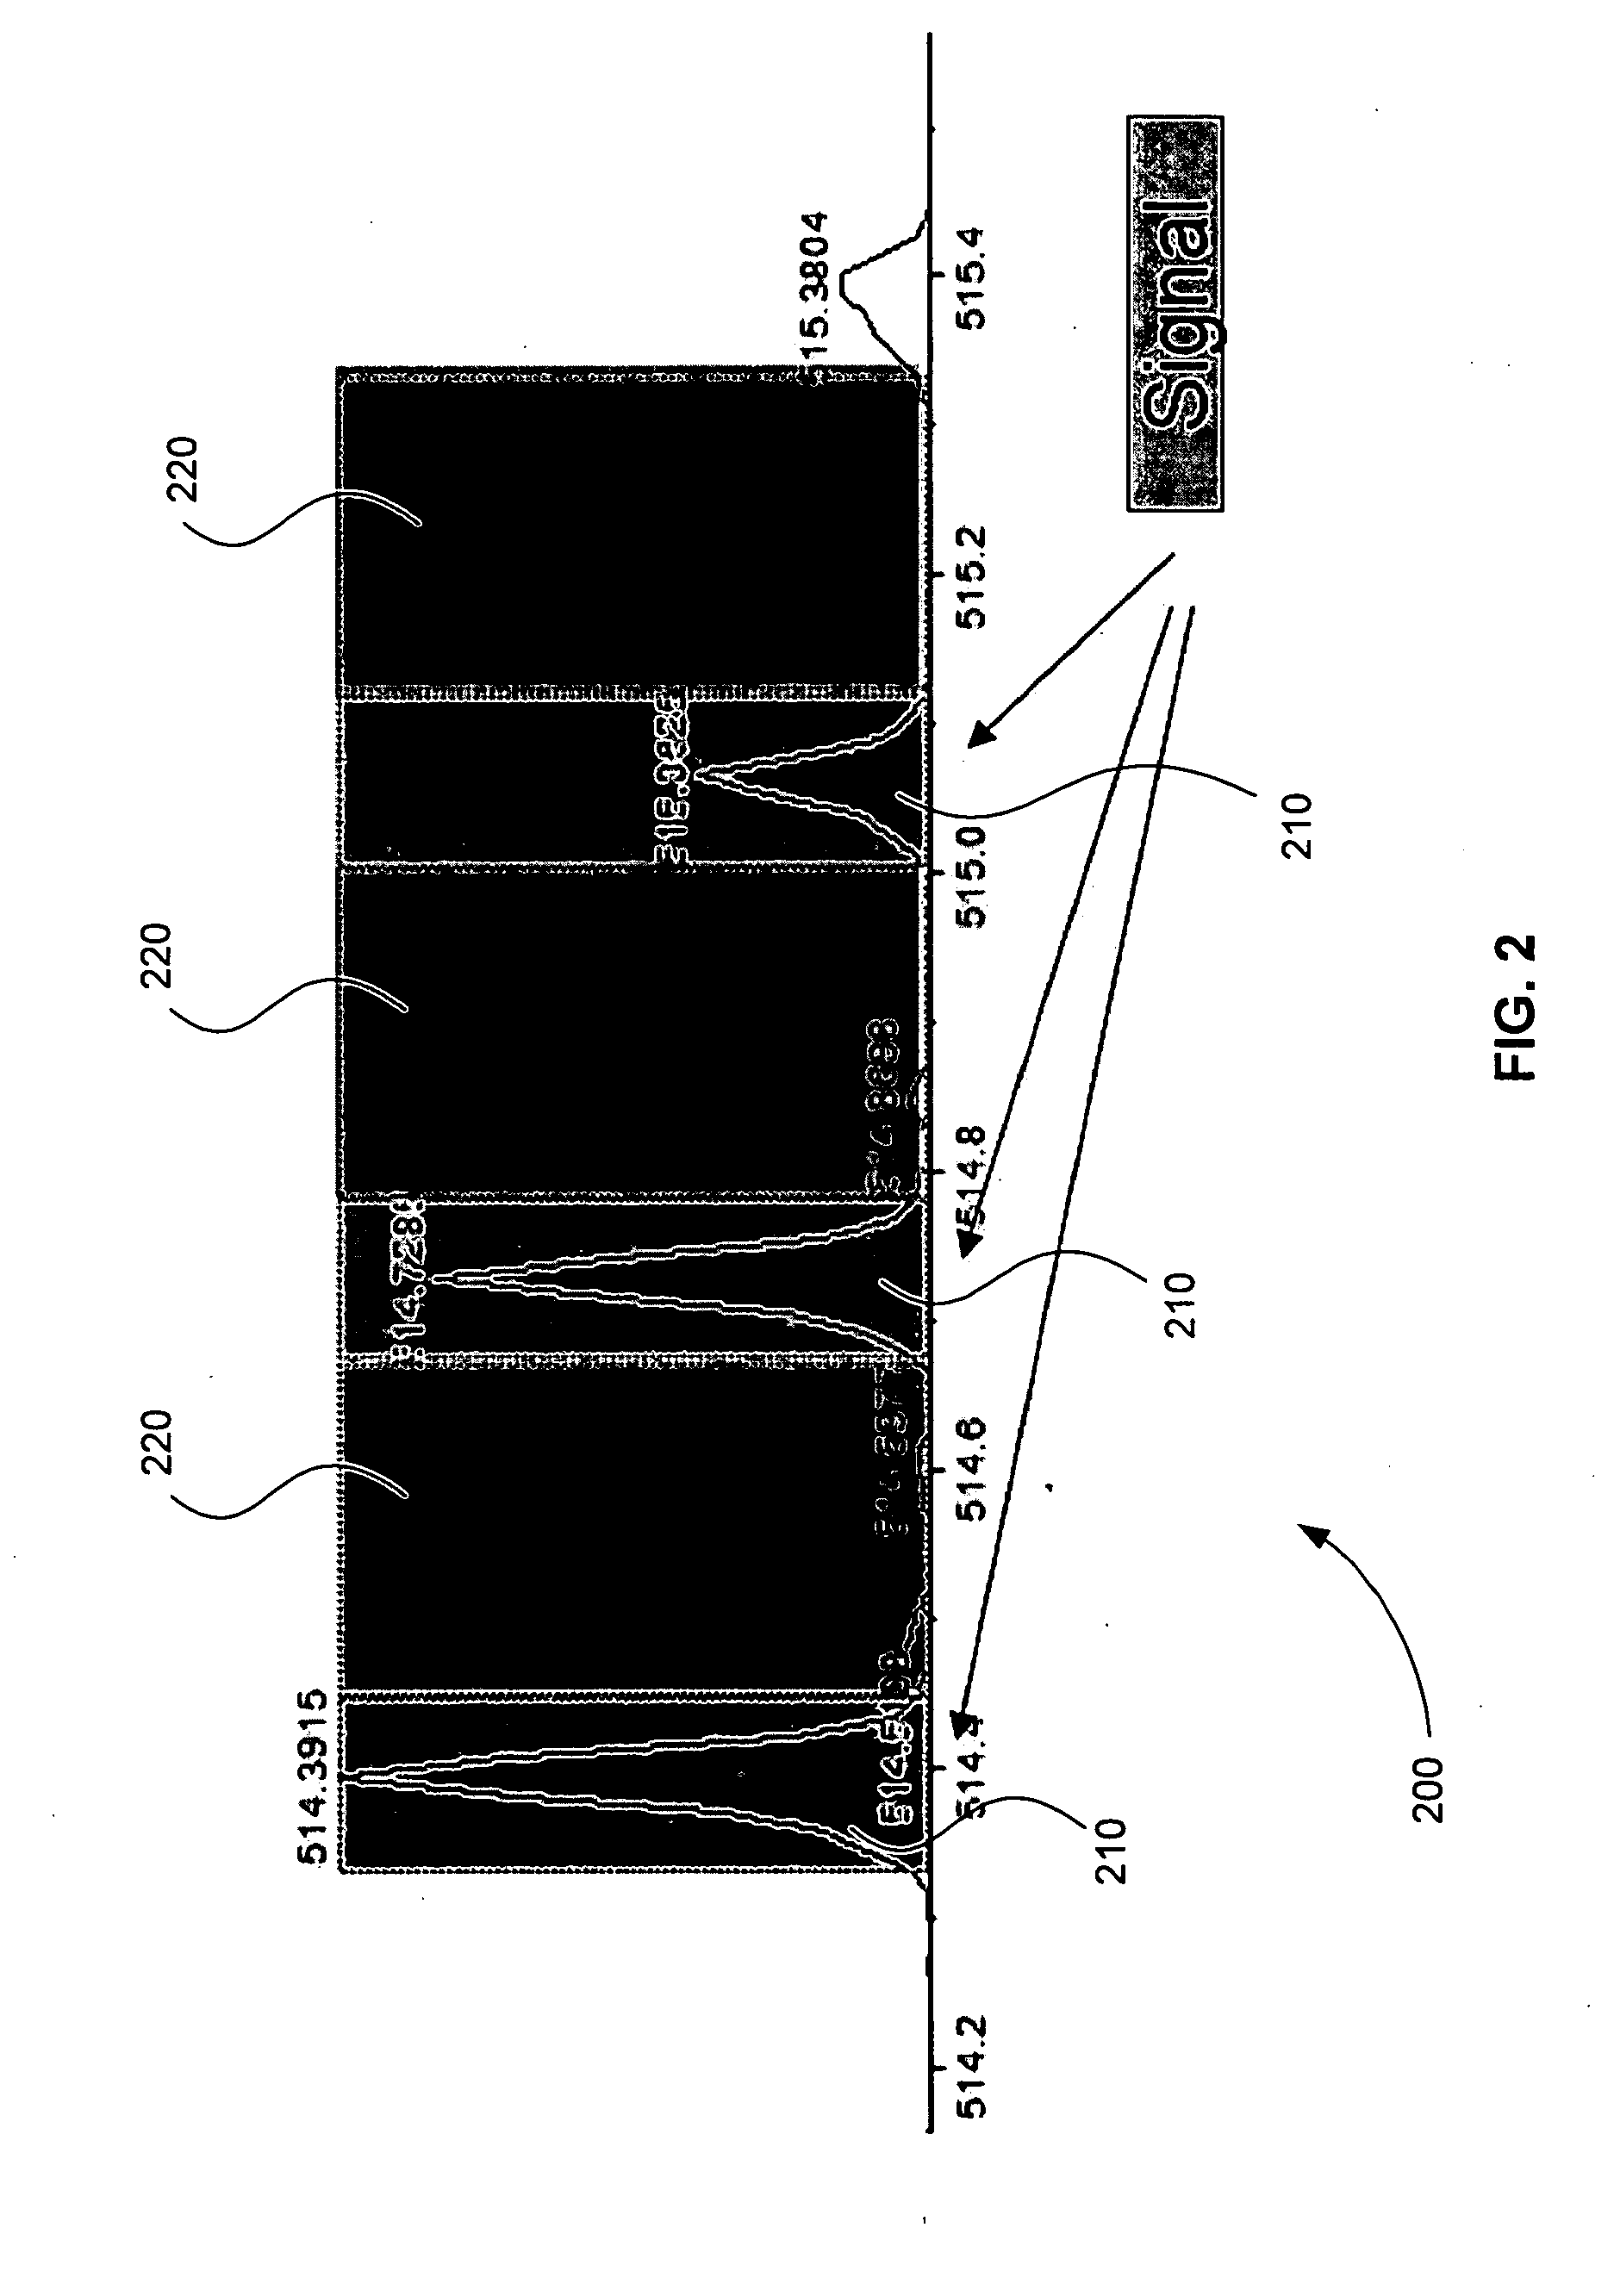 Methods and systems for background correction in tandem mass spectrometry based quantitation